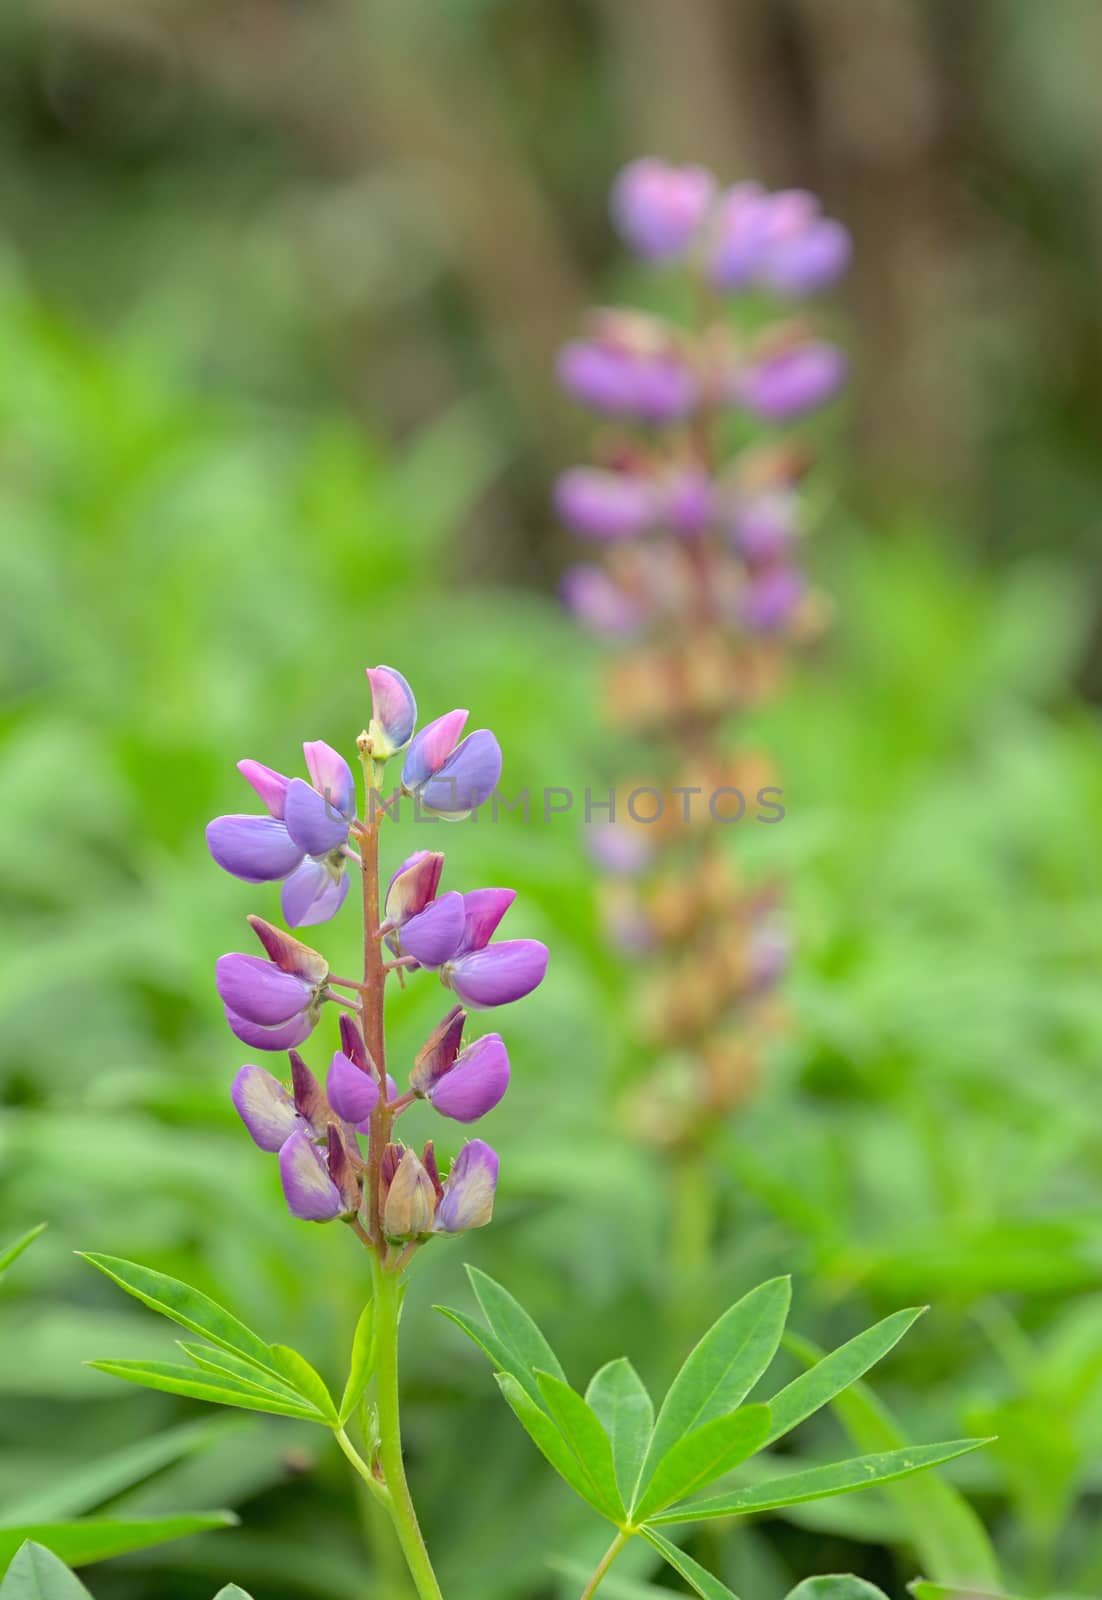 Lupine flower in the botanical garden by mady70